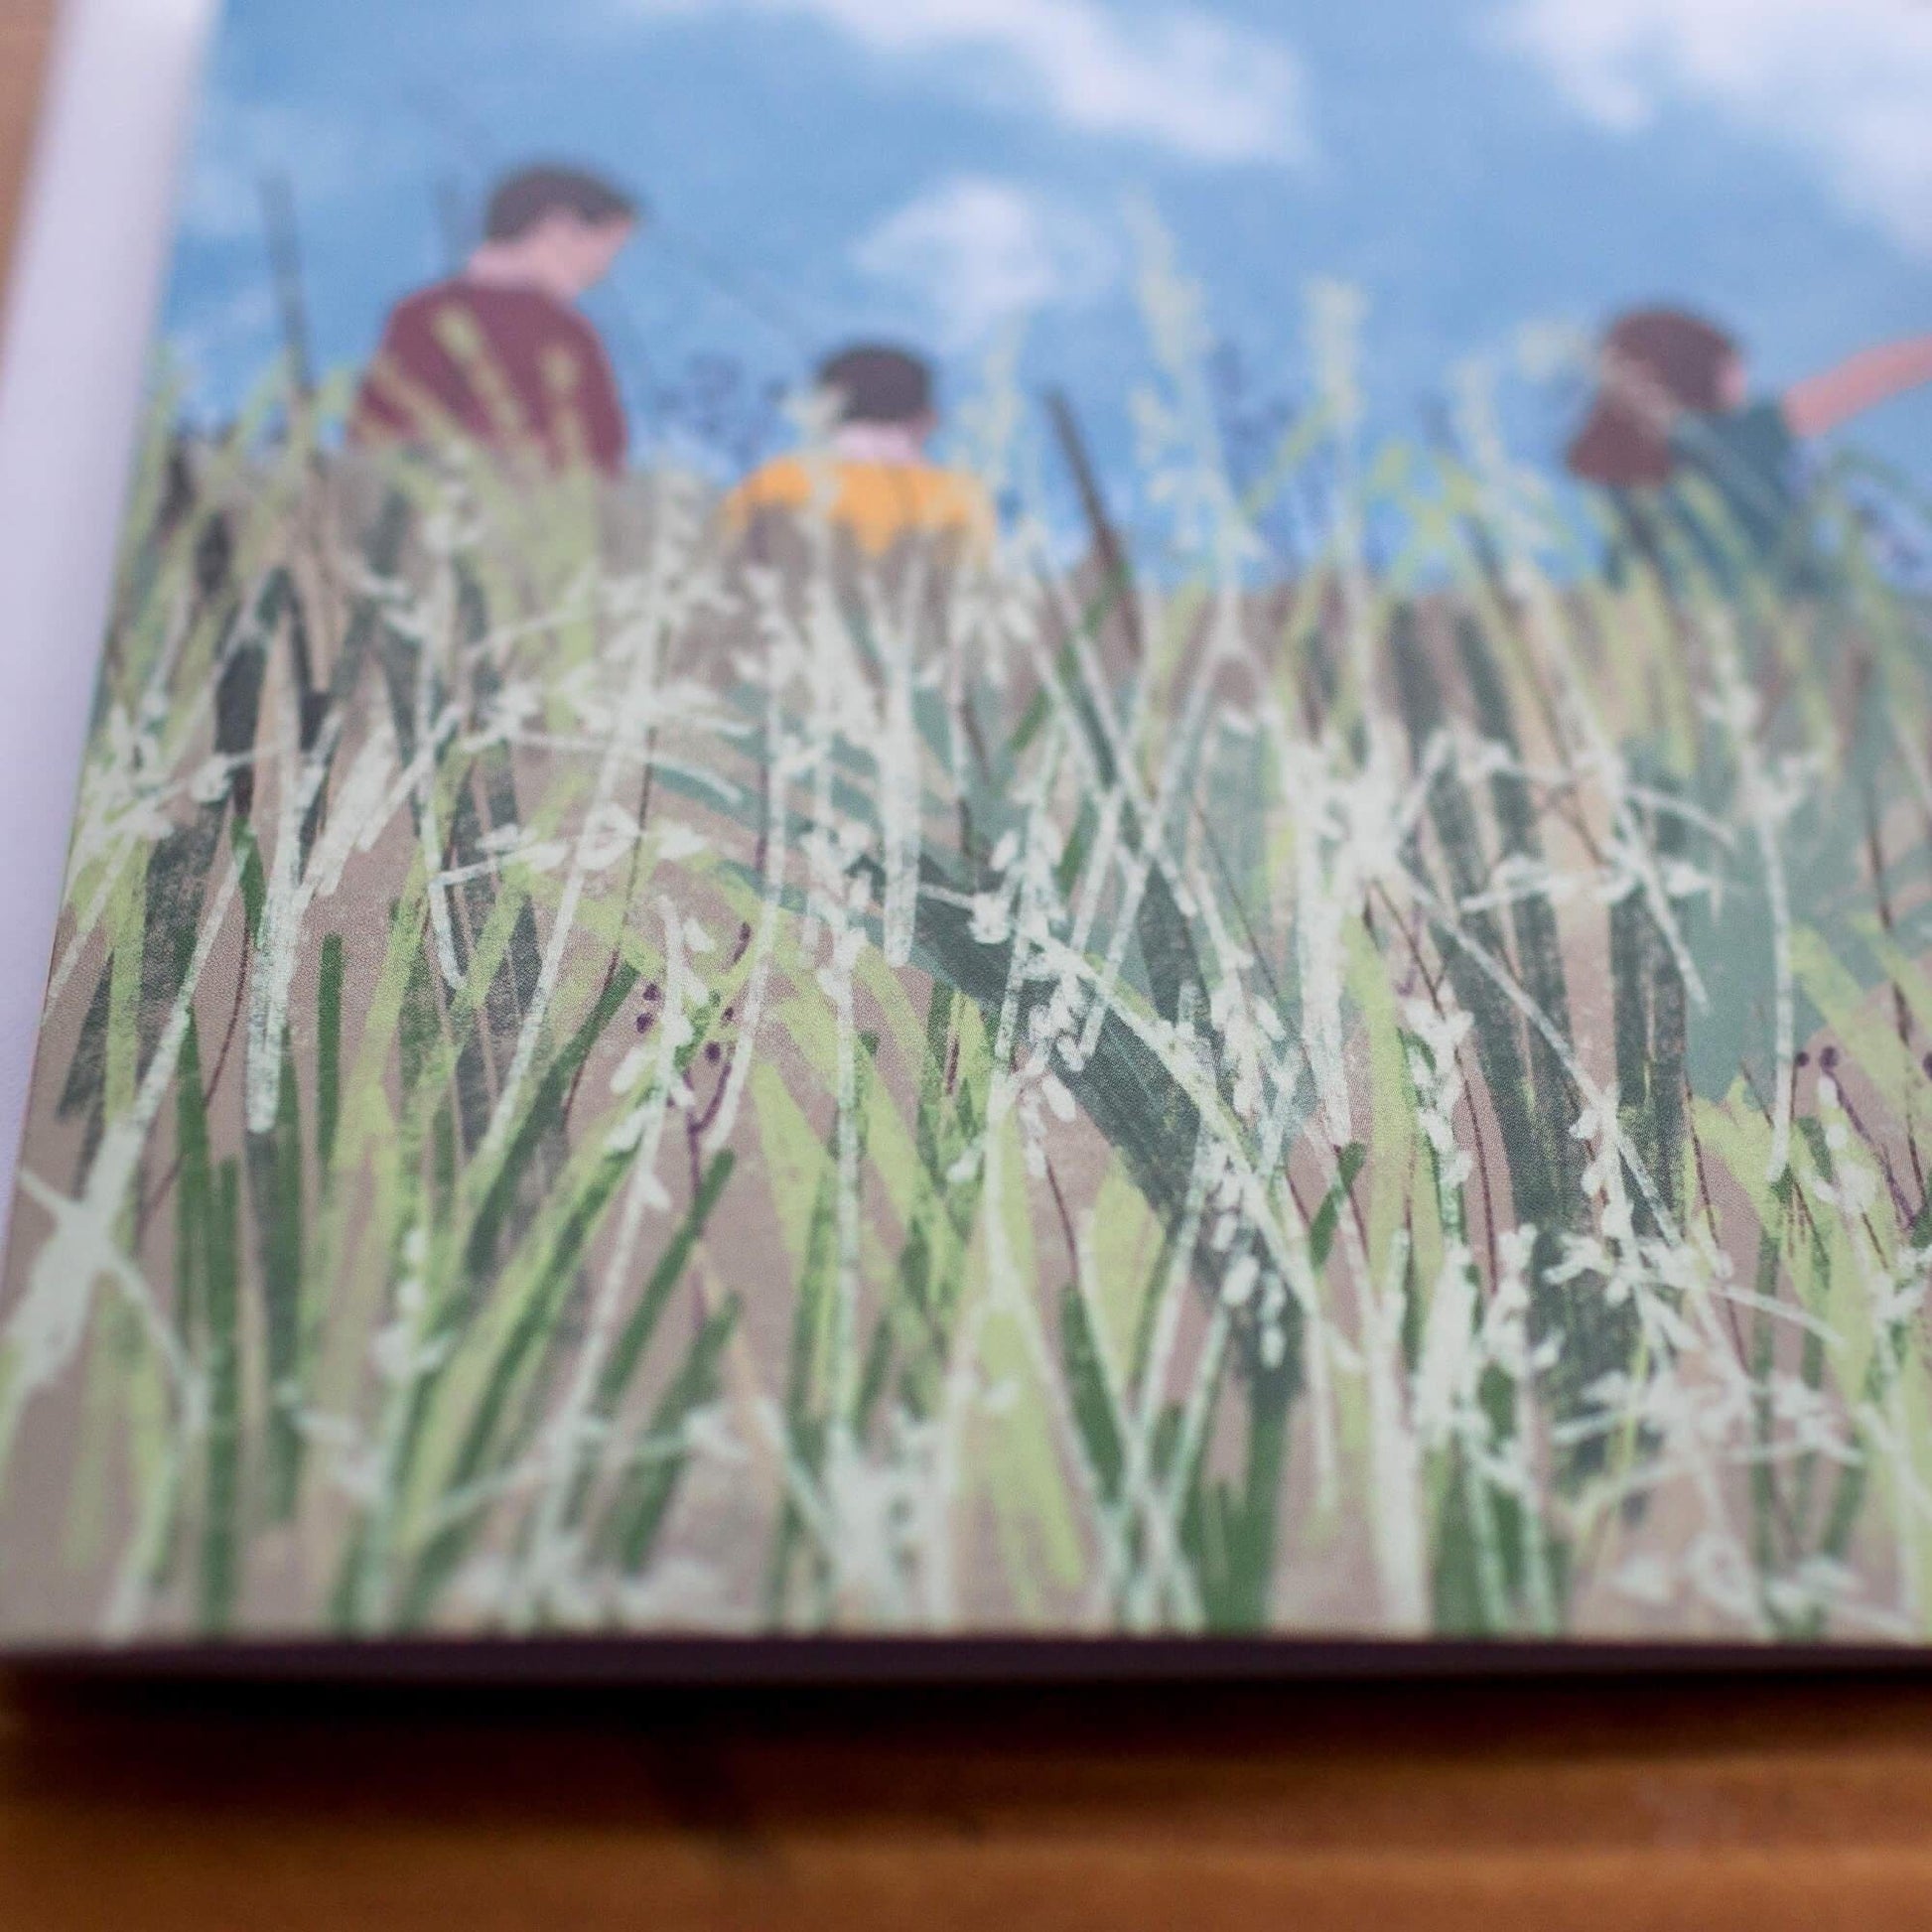 close up detail of the long grass and flowers